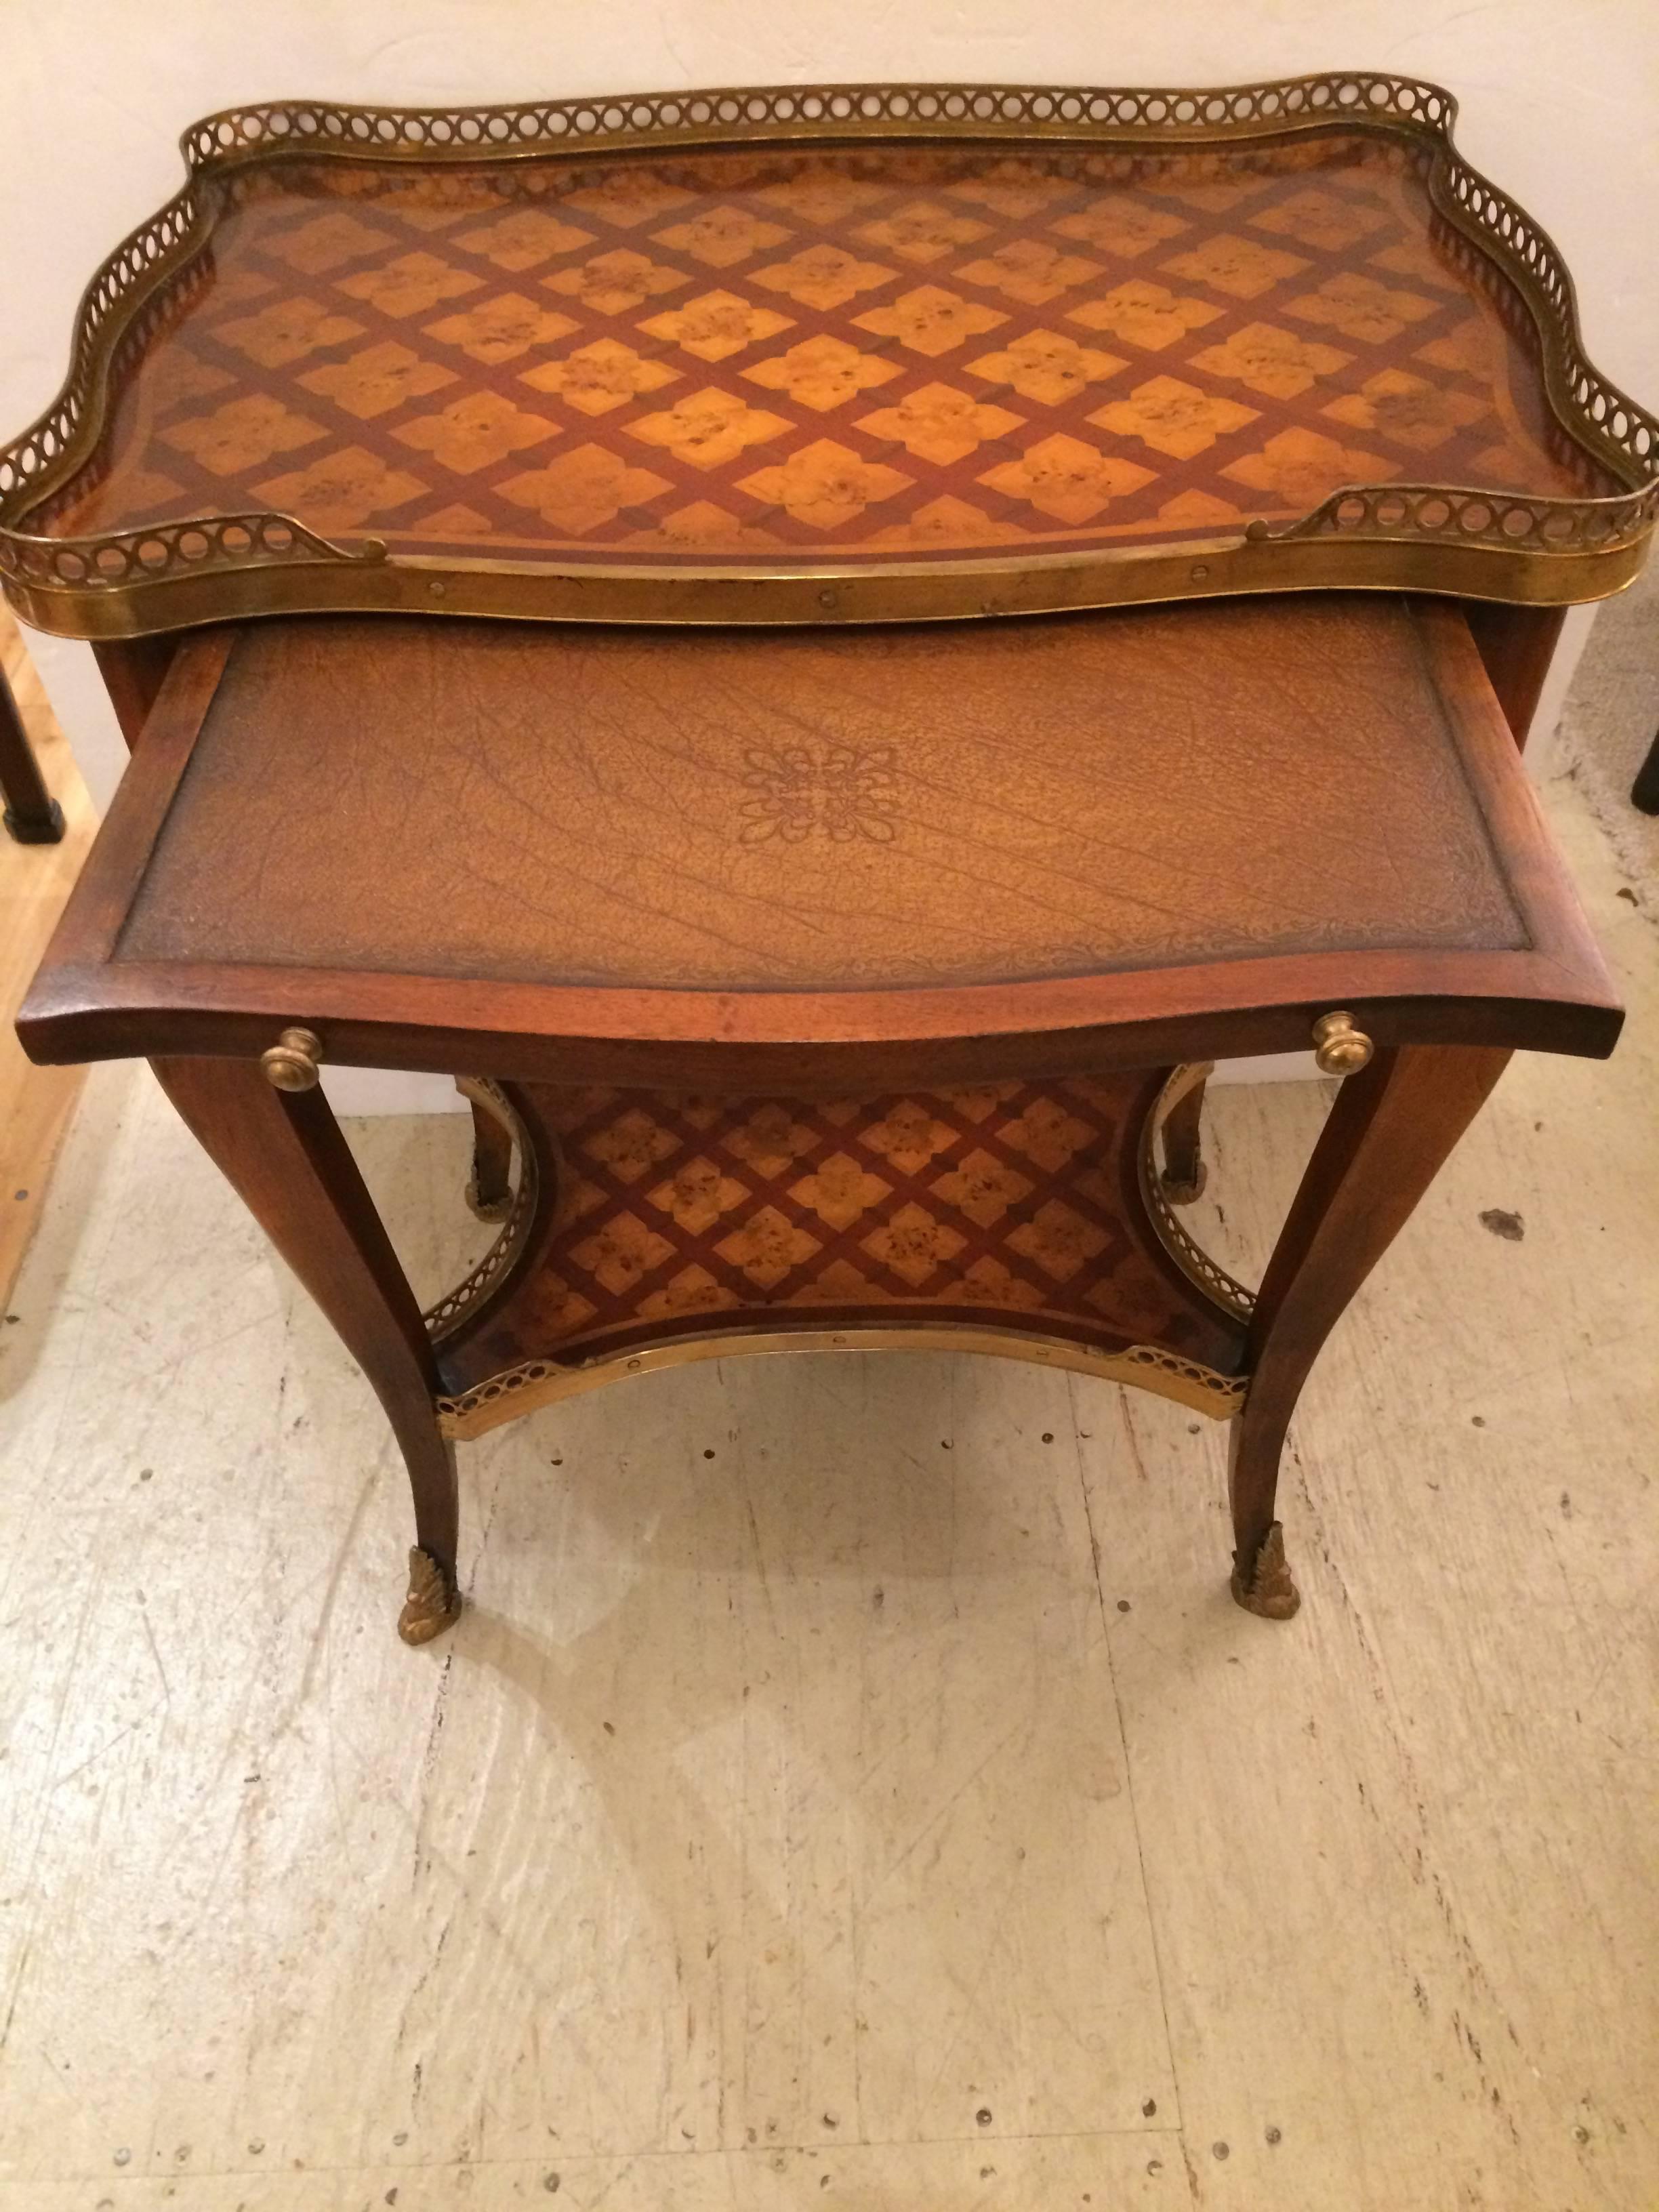 Especially beautiful two-tier side table having gorgeous inlaid wood in light and dark colors, a handsome filligree brass gallery on top and bottom, cabriole elegant legs with brass caps, and a single drawer with original hardware.